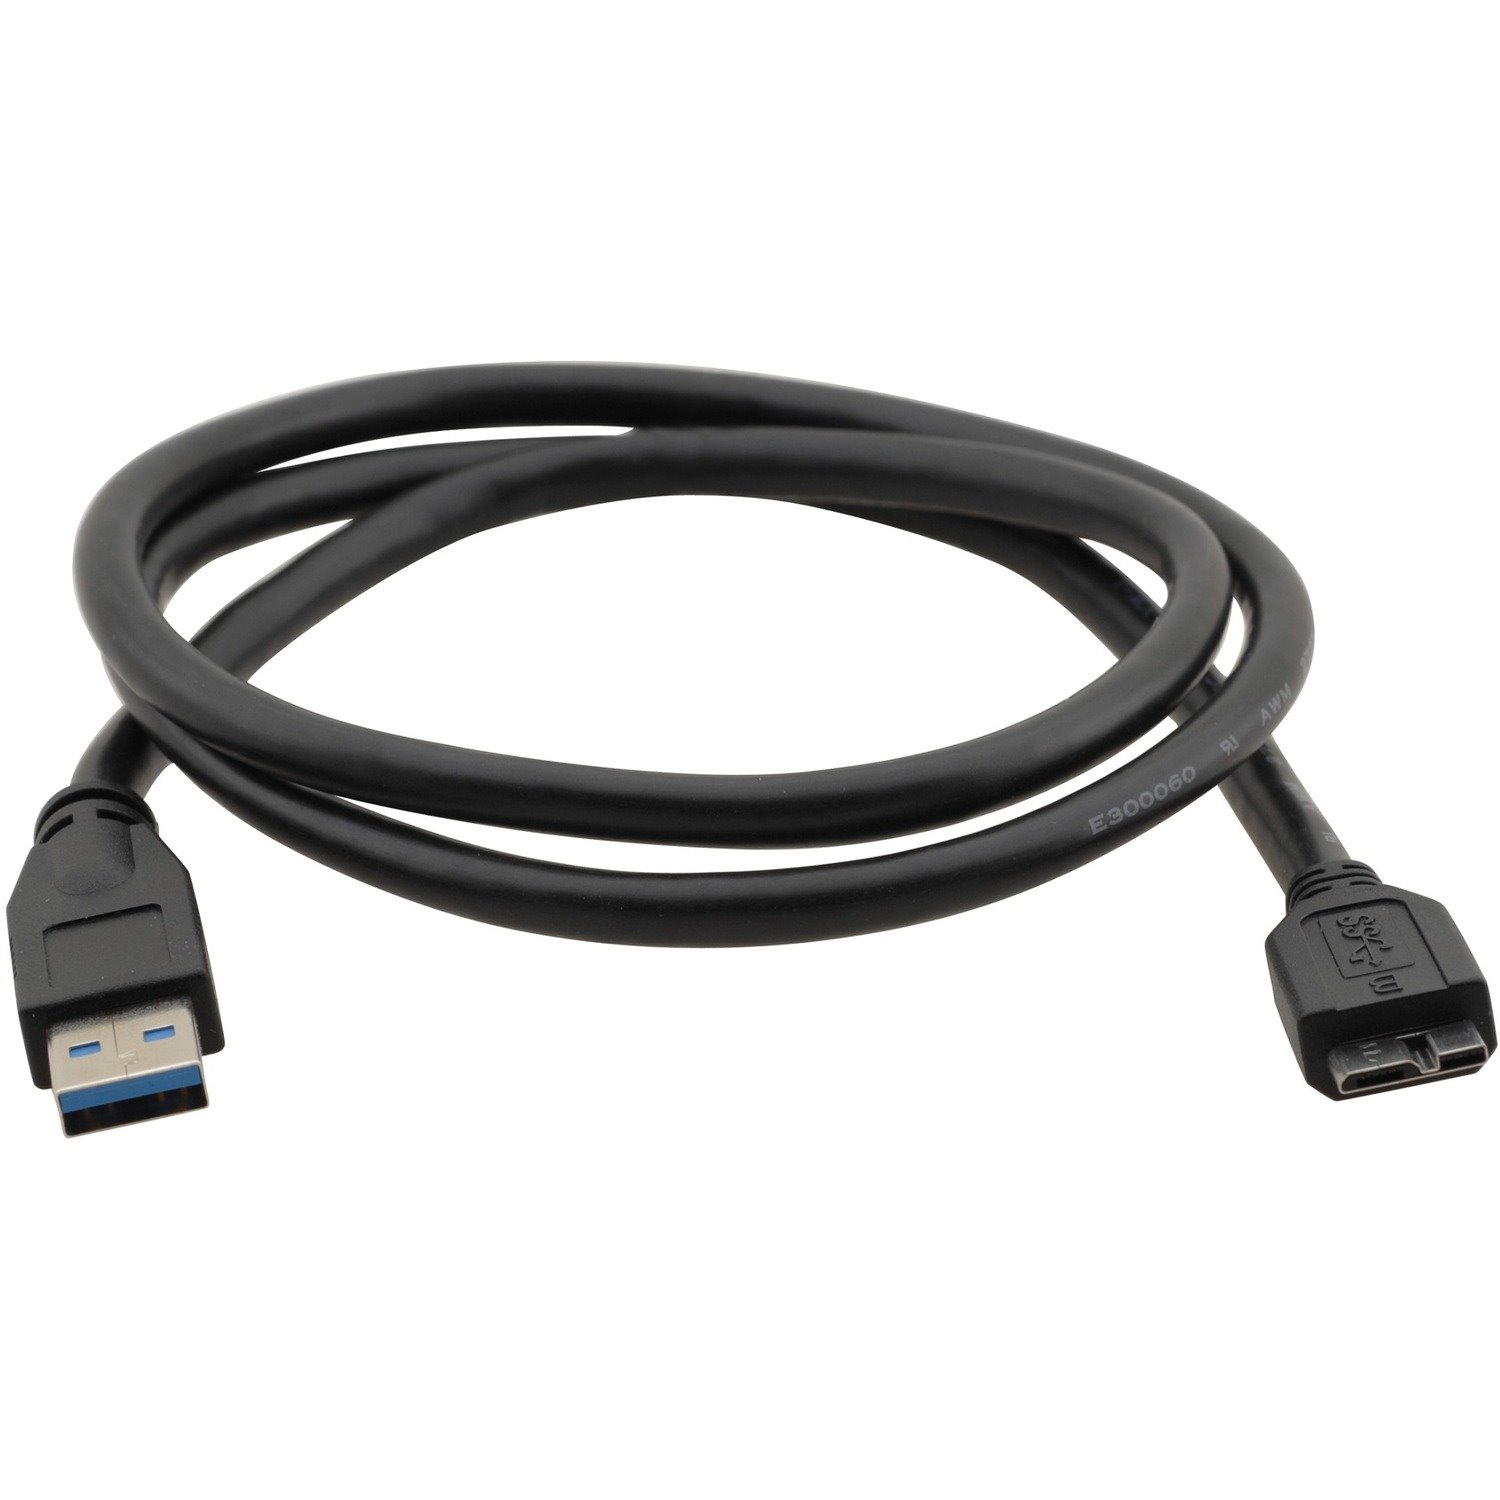 Kramer USB-A to Micro B 3.0 Cable